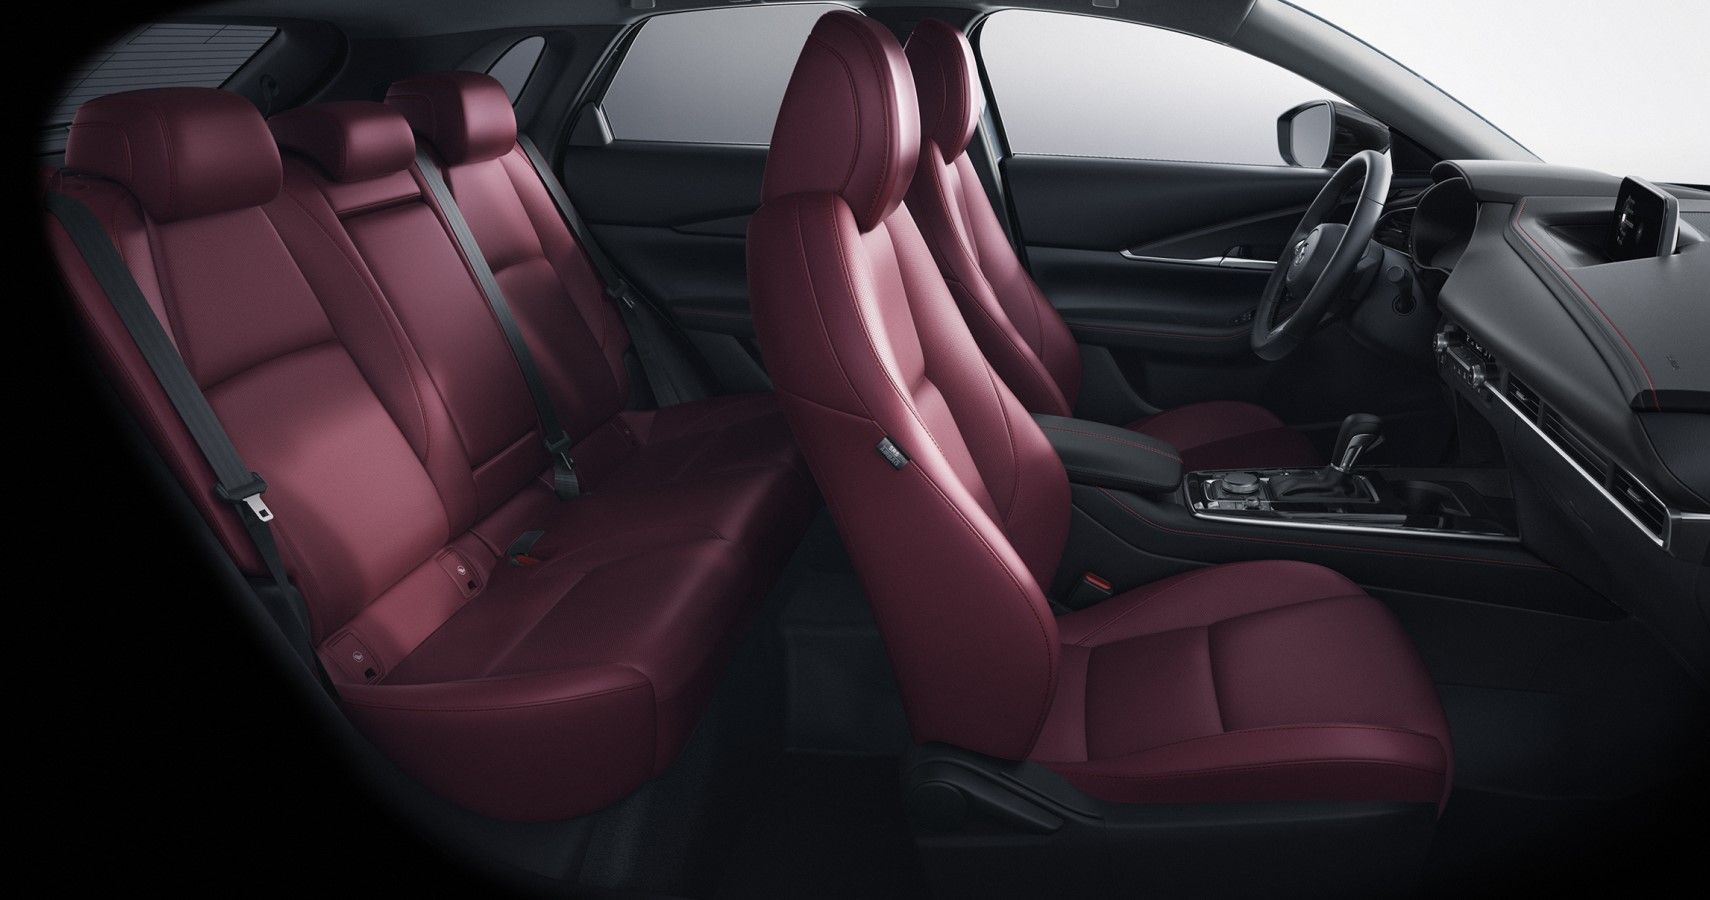 2022 Mazda CX-30 Carbon Edition seating layout side view